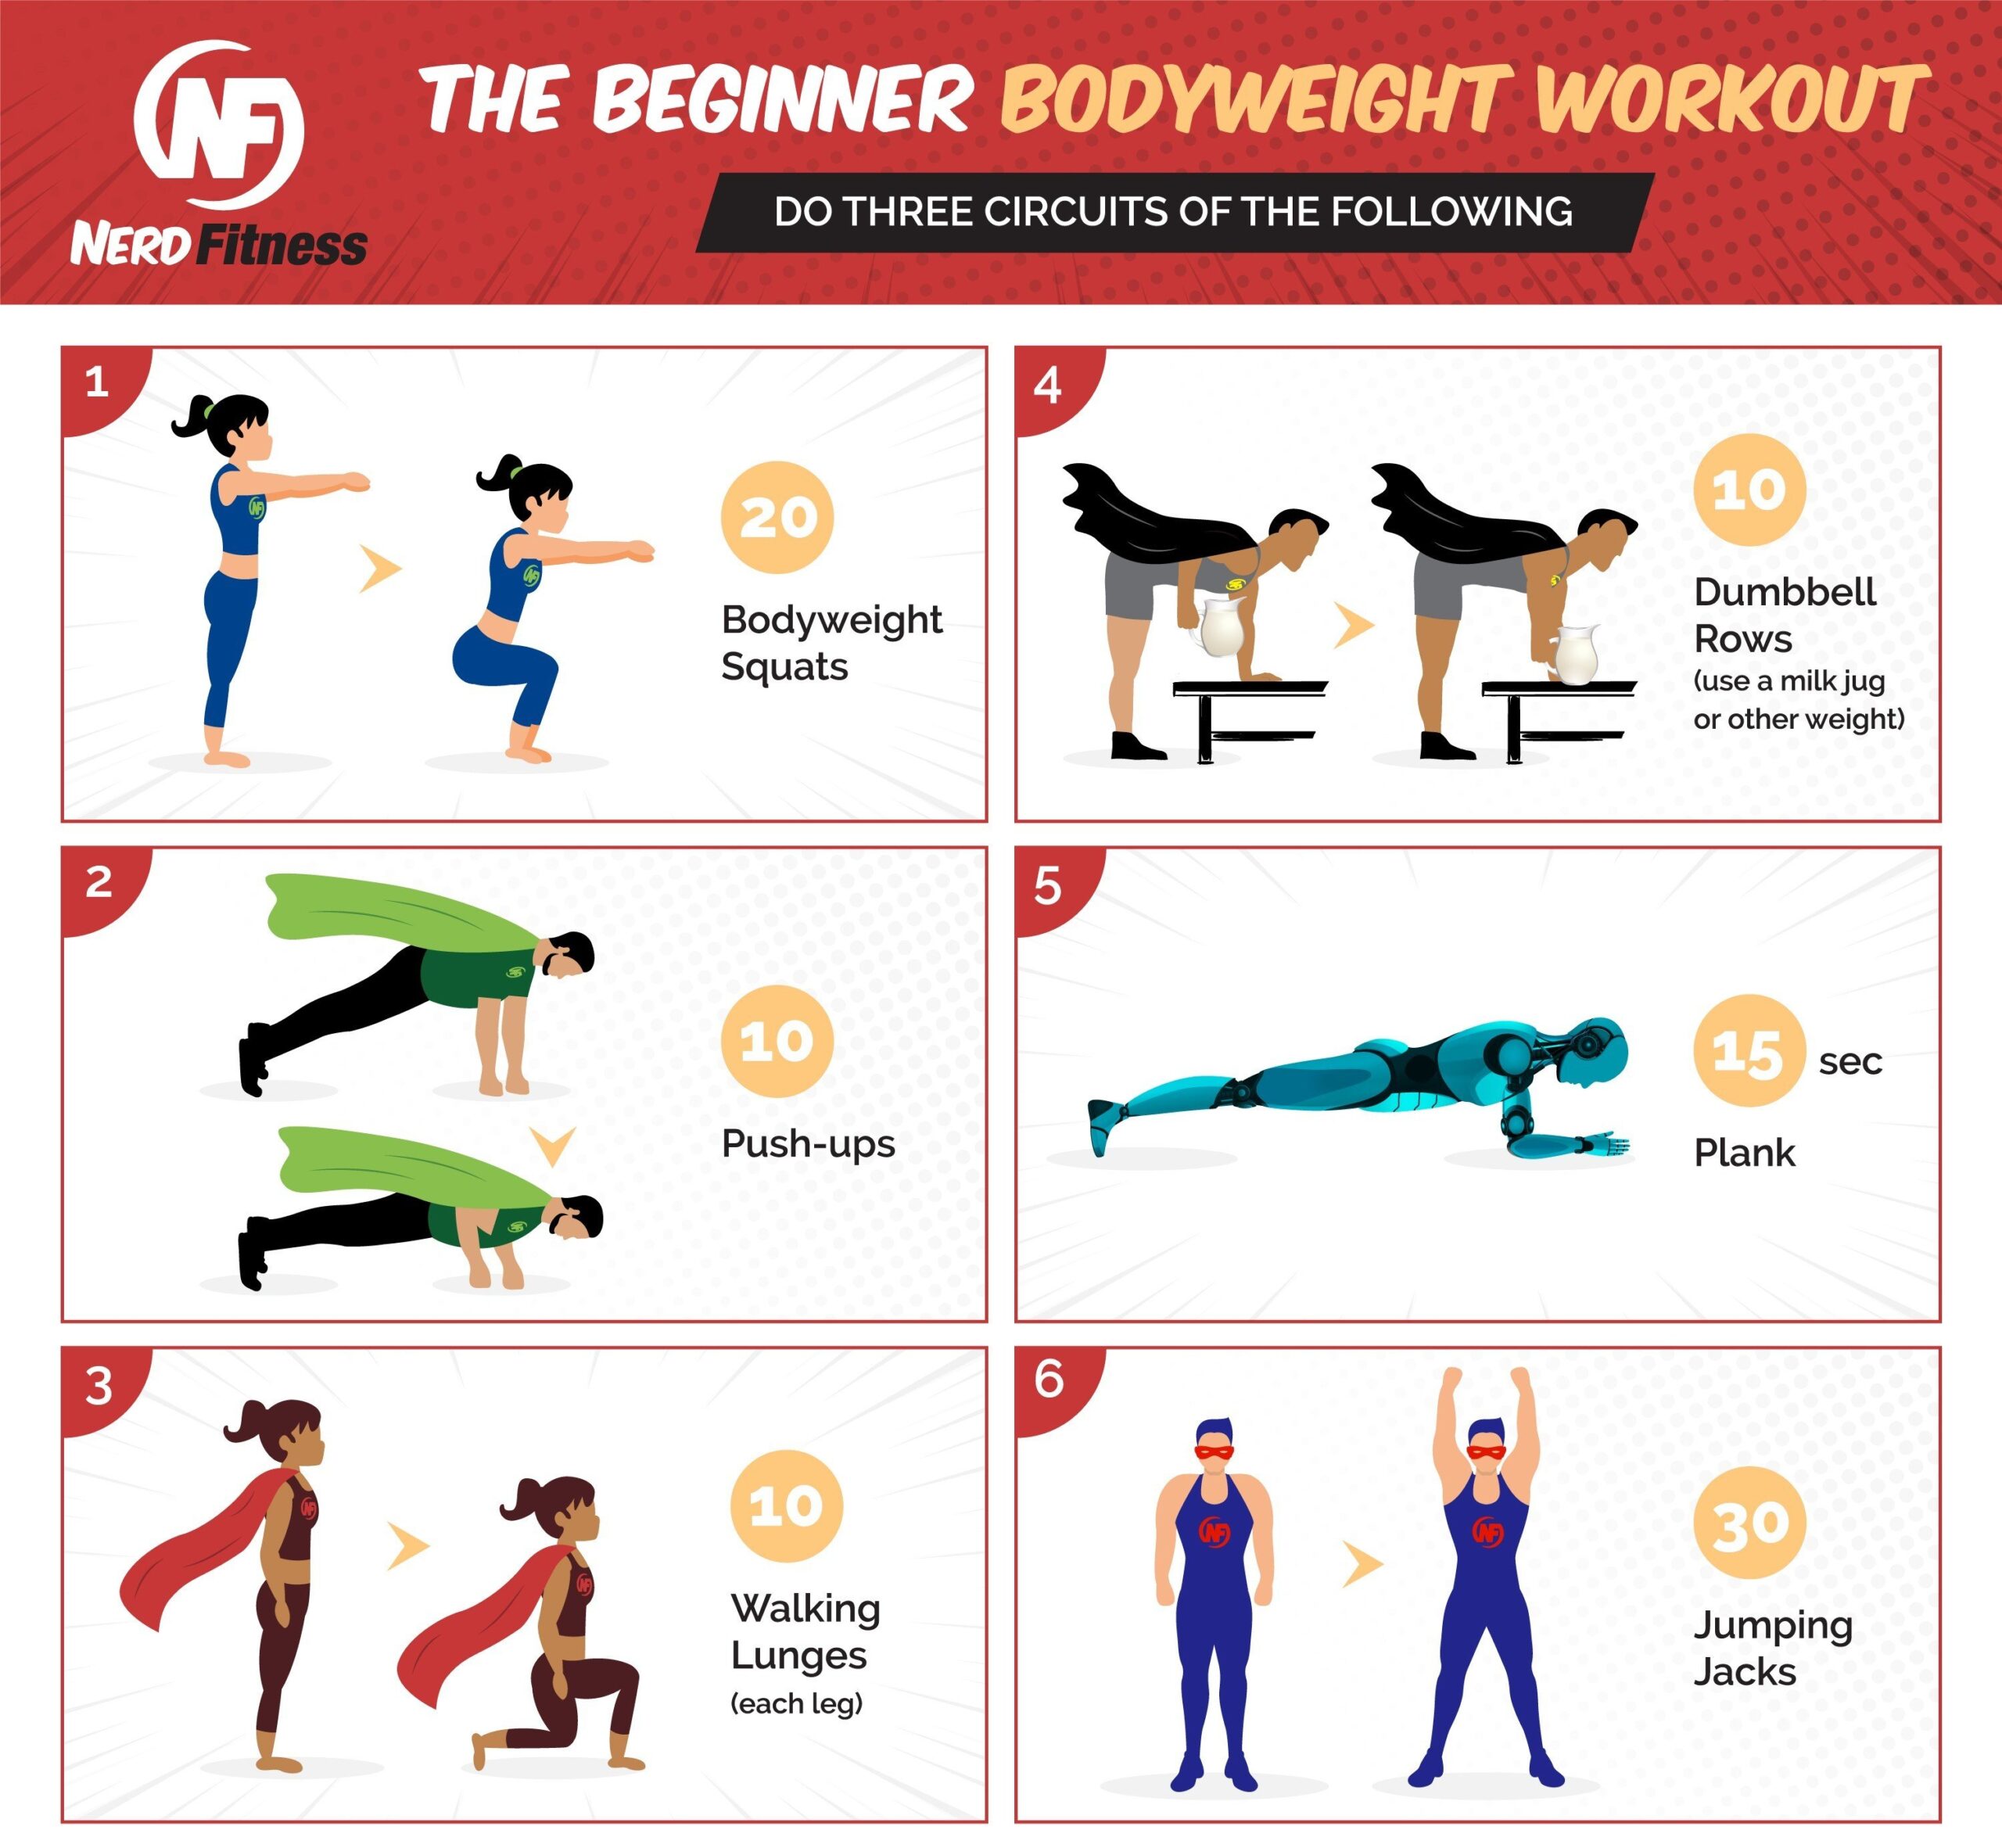 This infographic will show you the 6 exercises needed to complete our Beginner Bodyweight Workout.